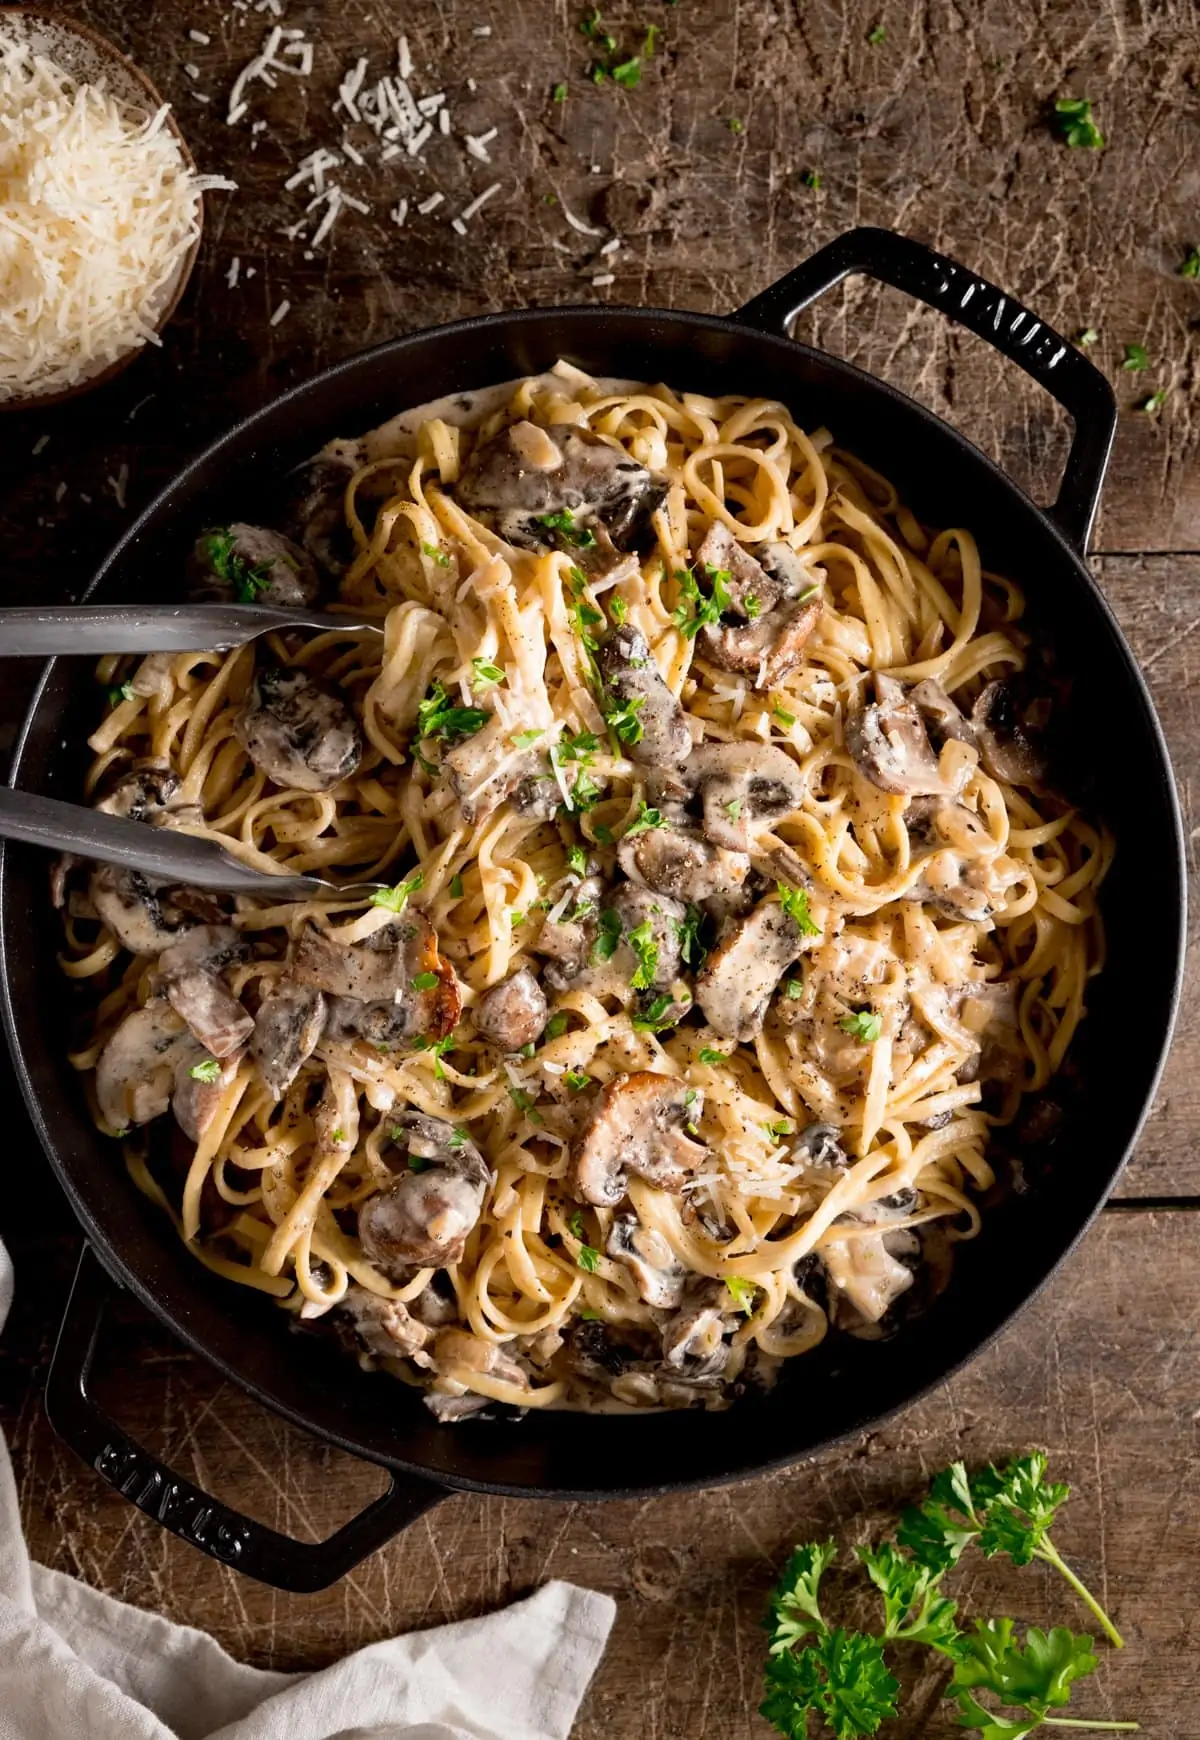 A big pan of creamy mushroom pasta with a set of metal tongs stuck in,. The pan is on a wooden background with parsley and grated parmesan scattered around.